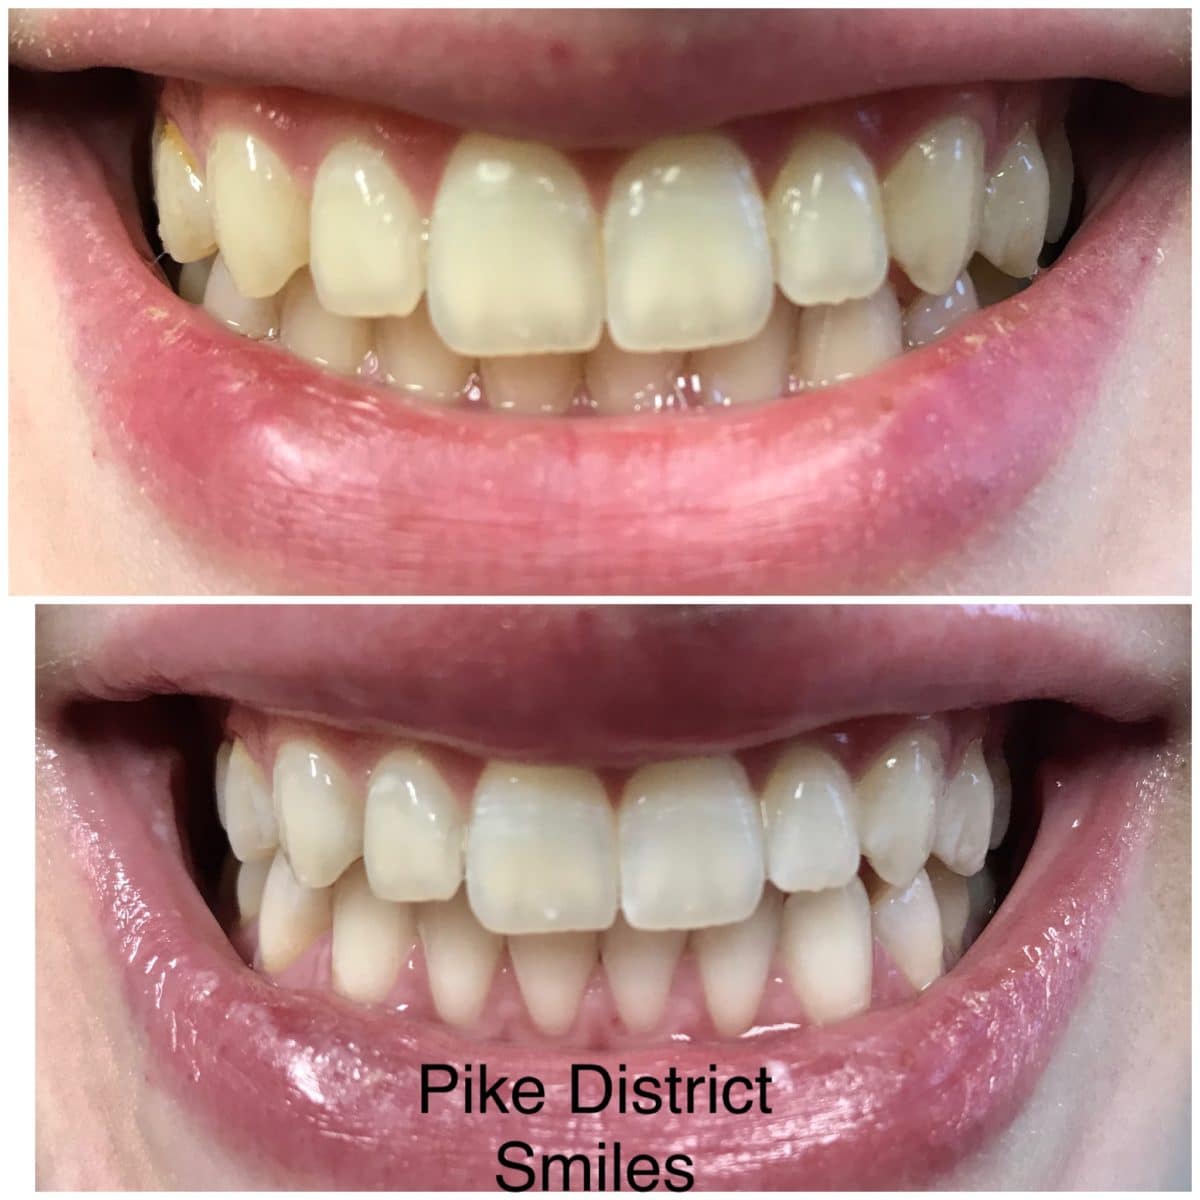 Up and down comparison of teeth whitening results at Pike District Smiles.